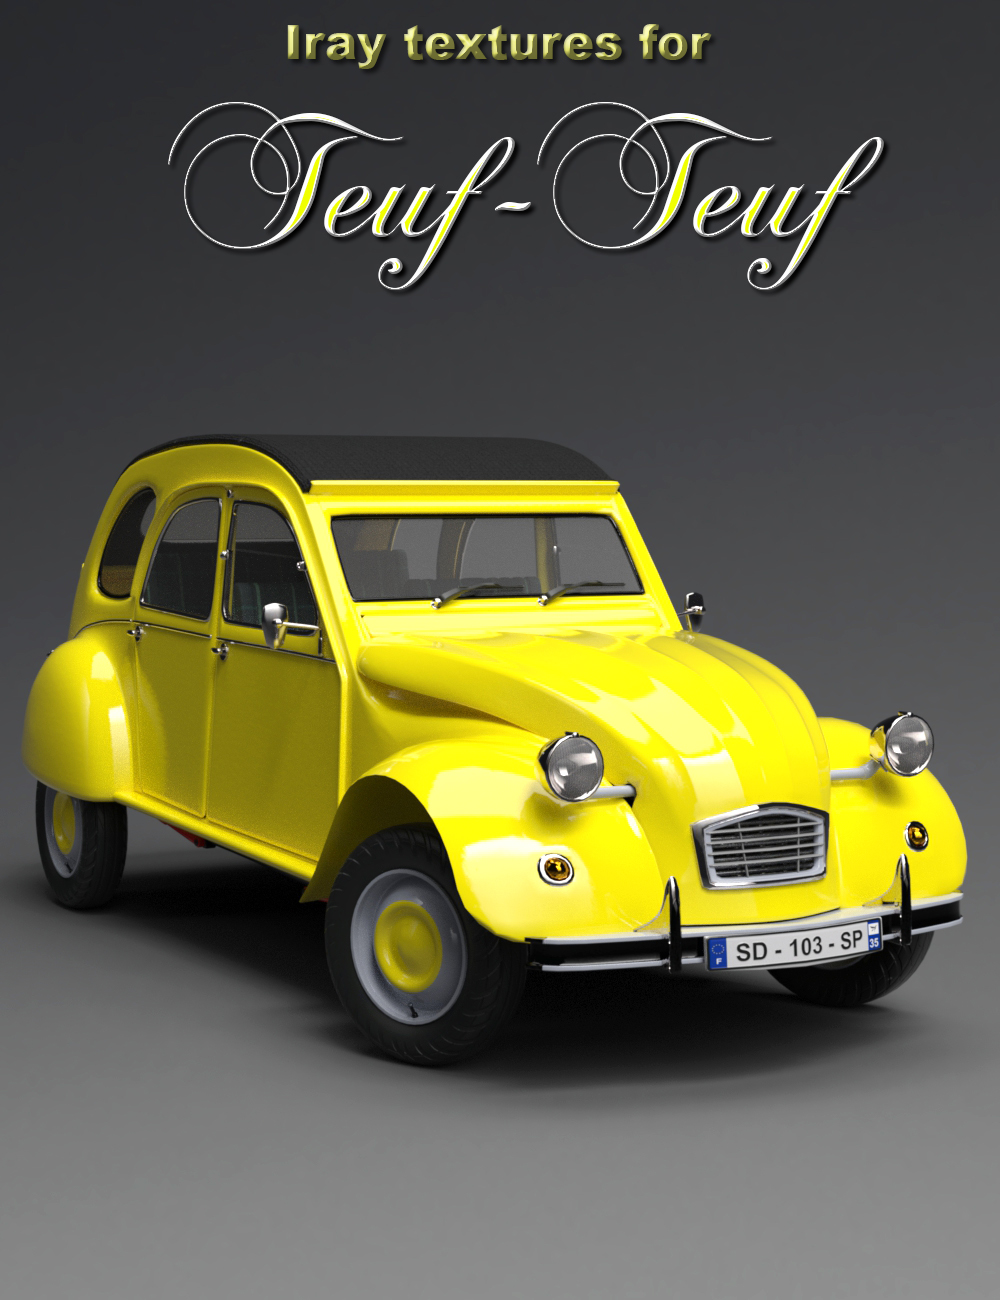 Teuf-Teuf Iray Textures Add-On by: 3djoji, 3D Models by Daz 3D